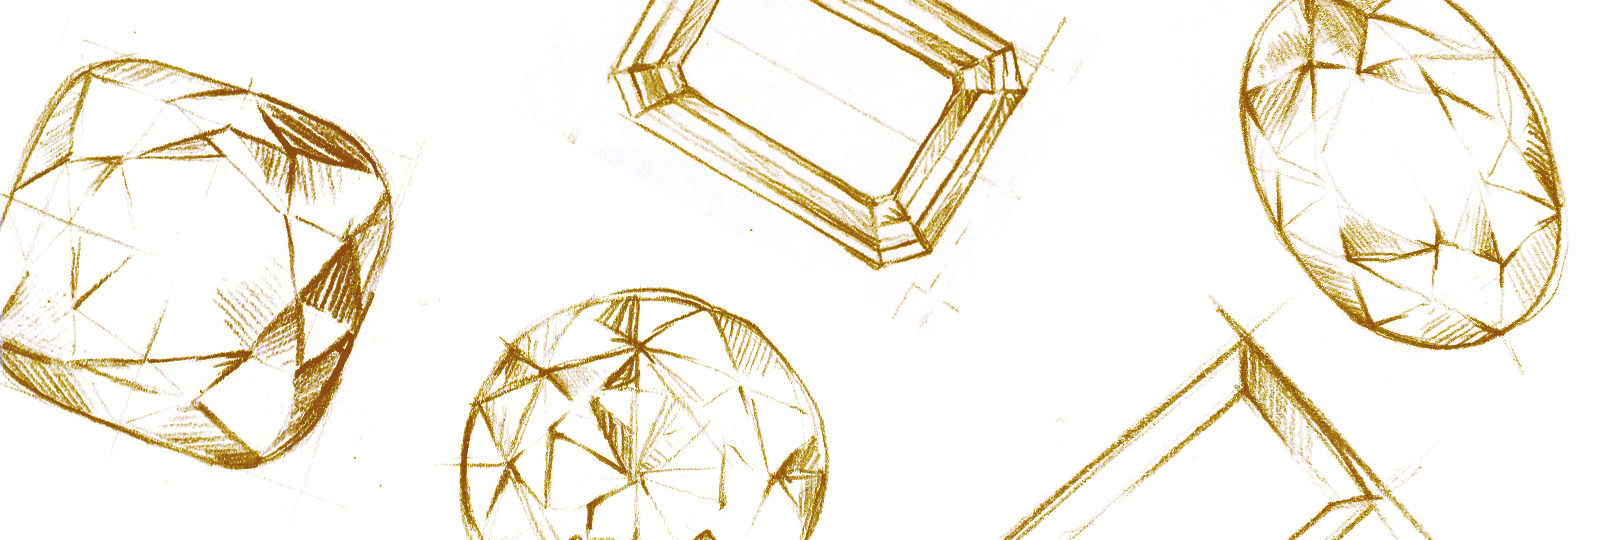 Sketch of different diamond shapes